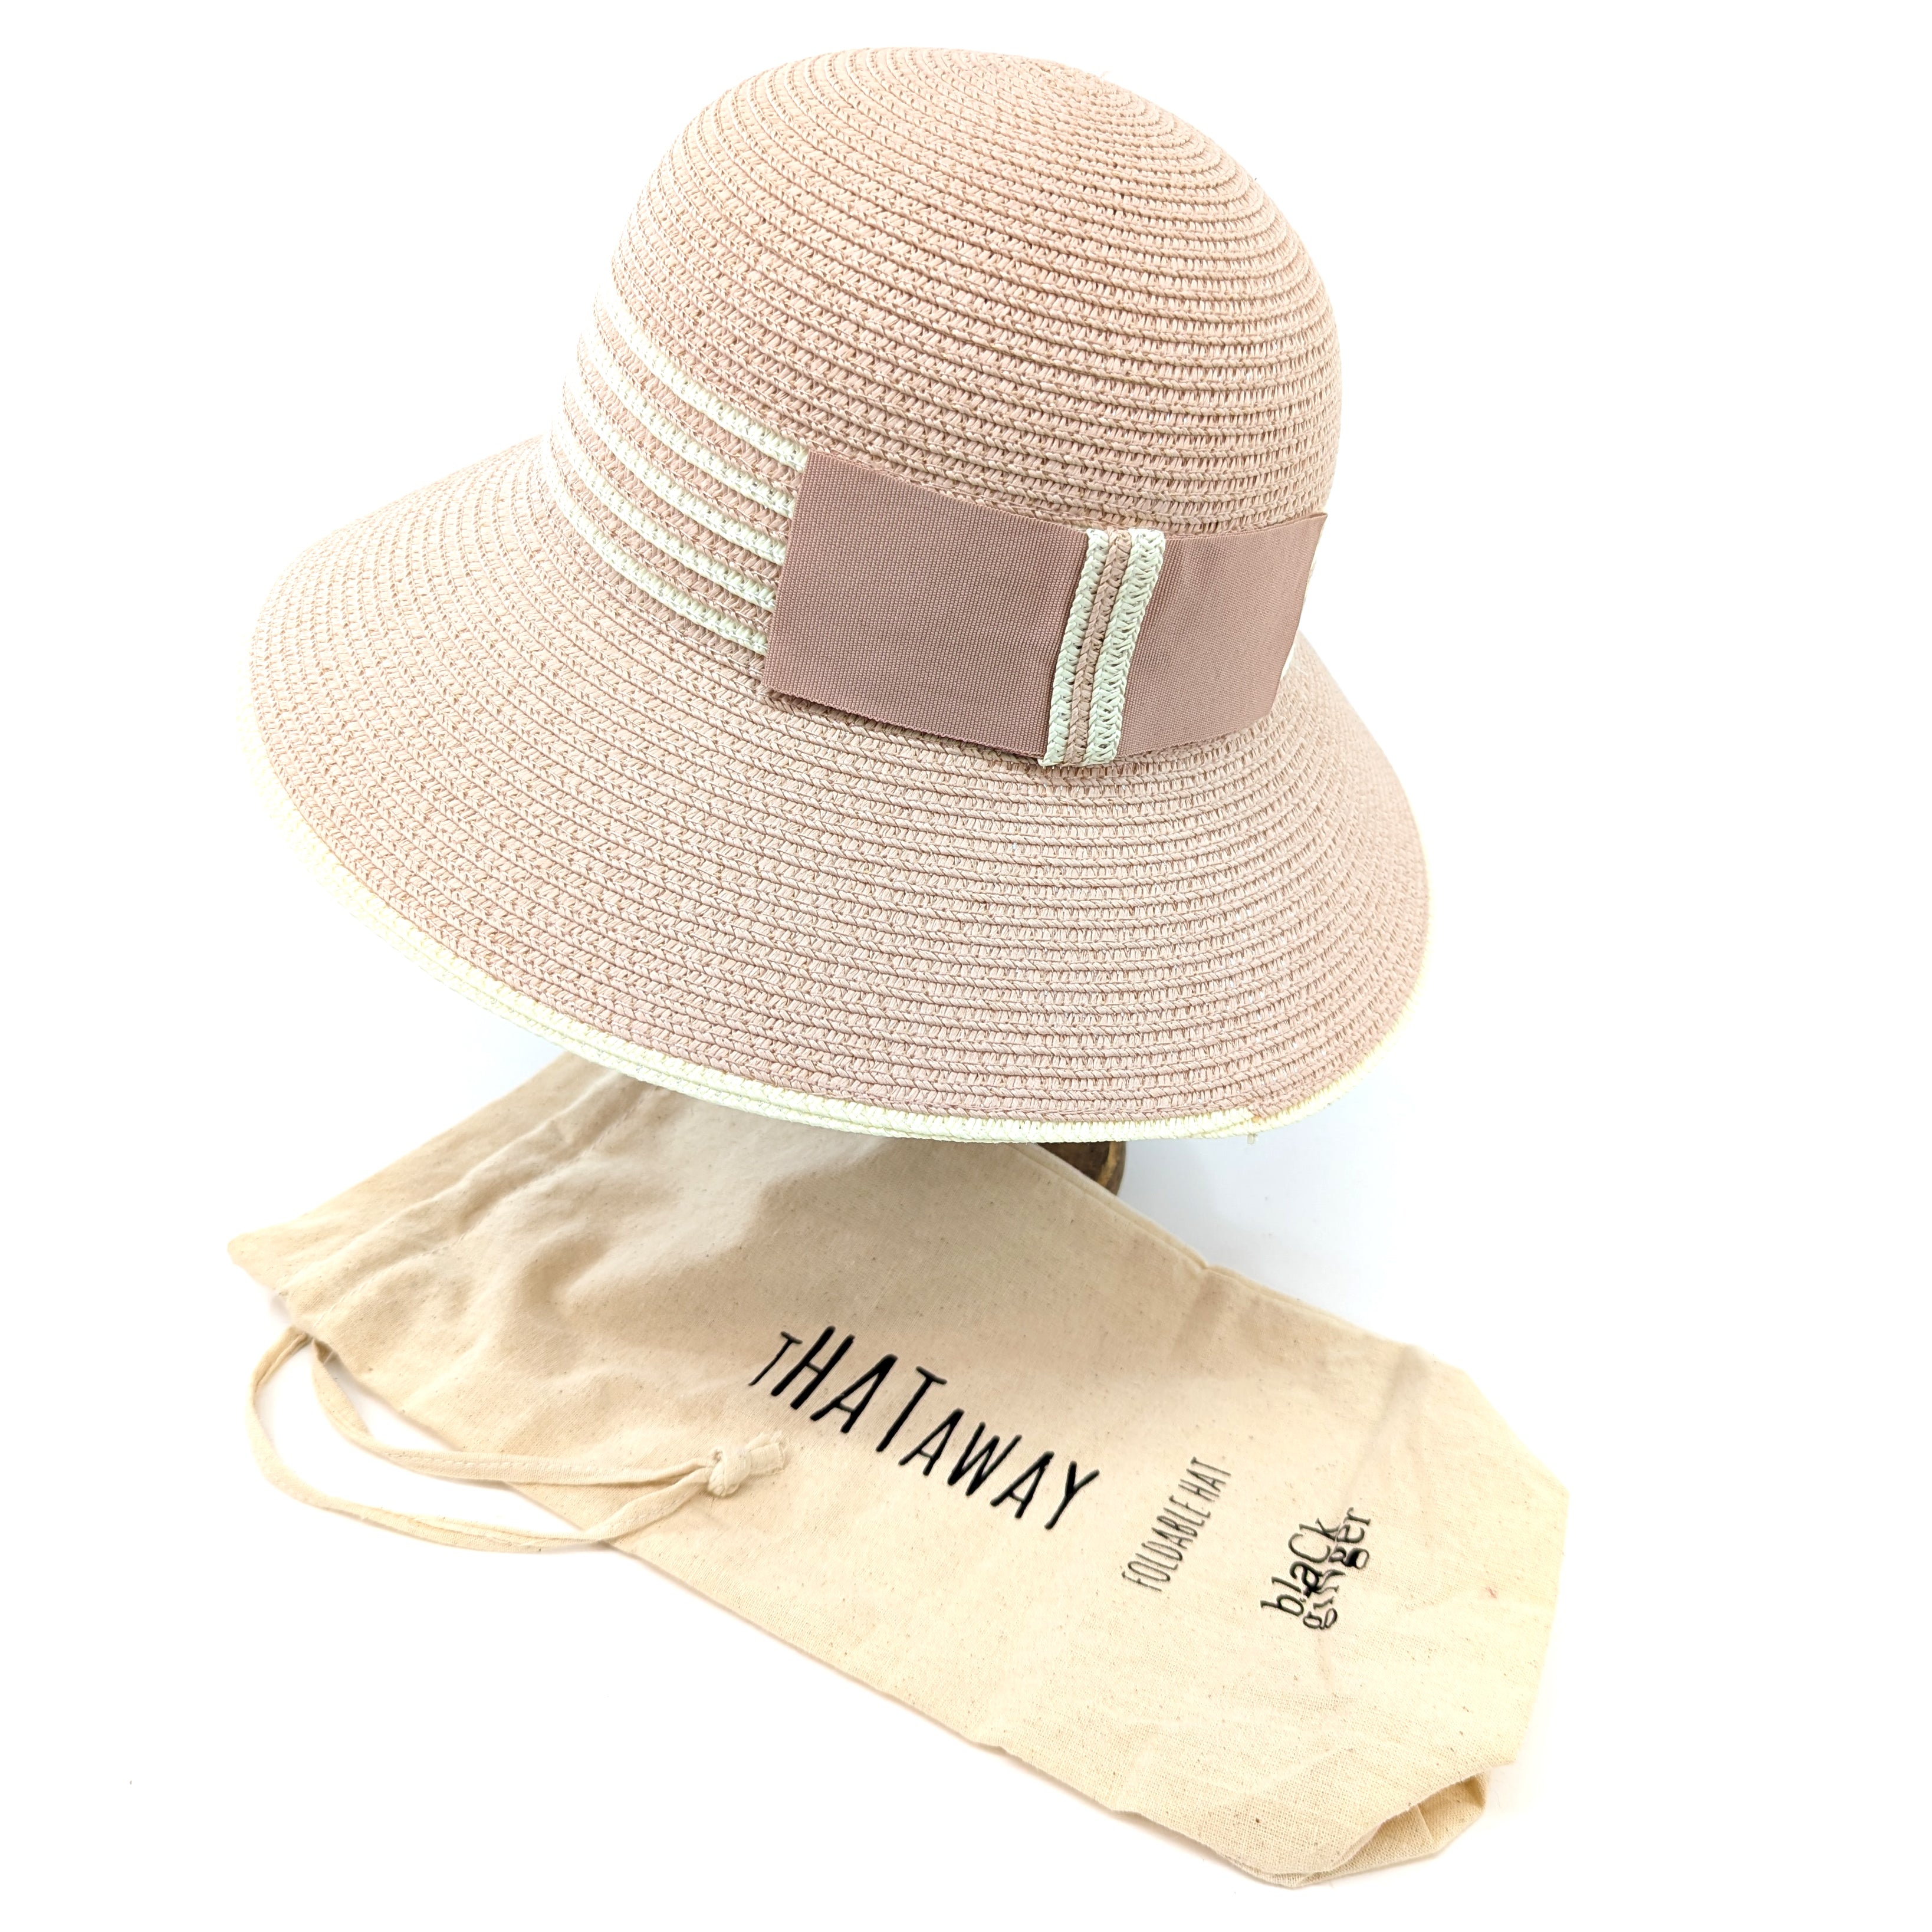 Folding Cloche Style Travel Sun Hat - Pink with Black Stripey Band